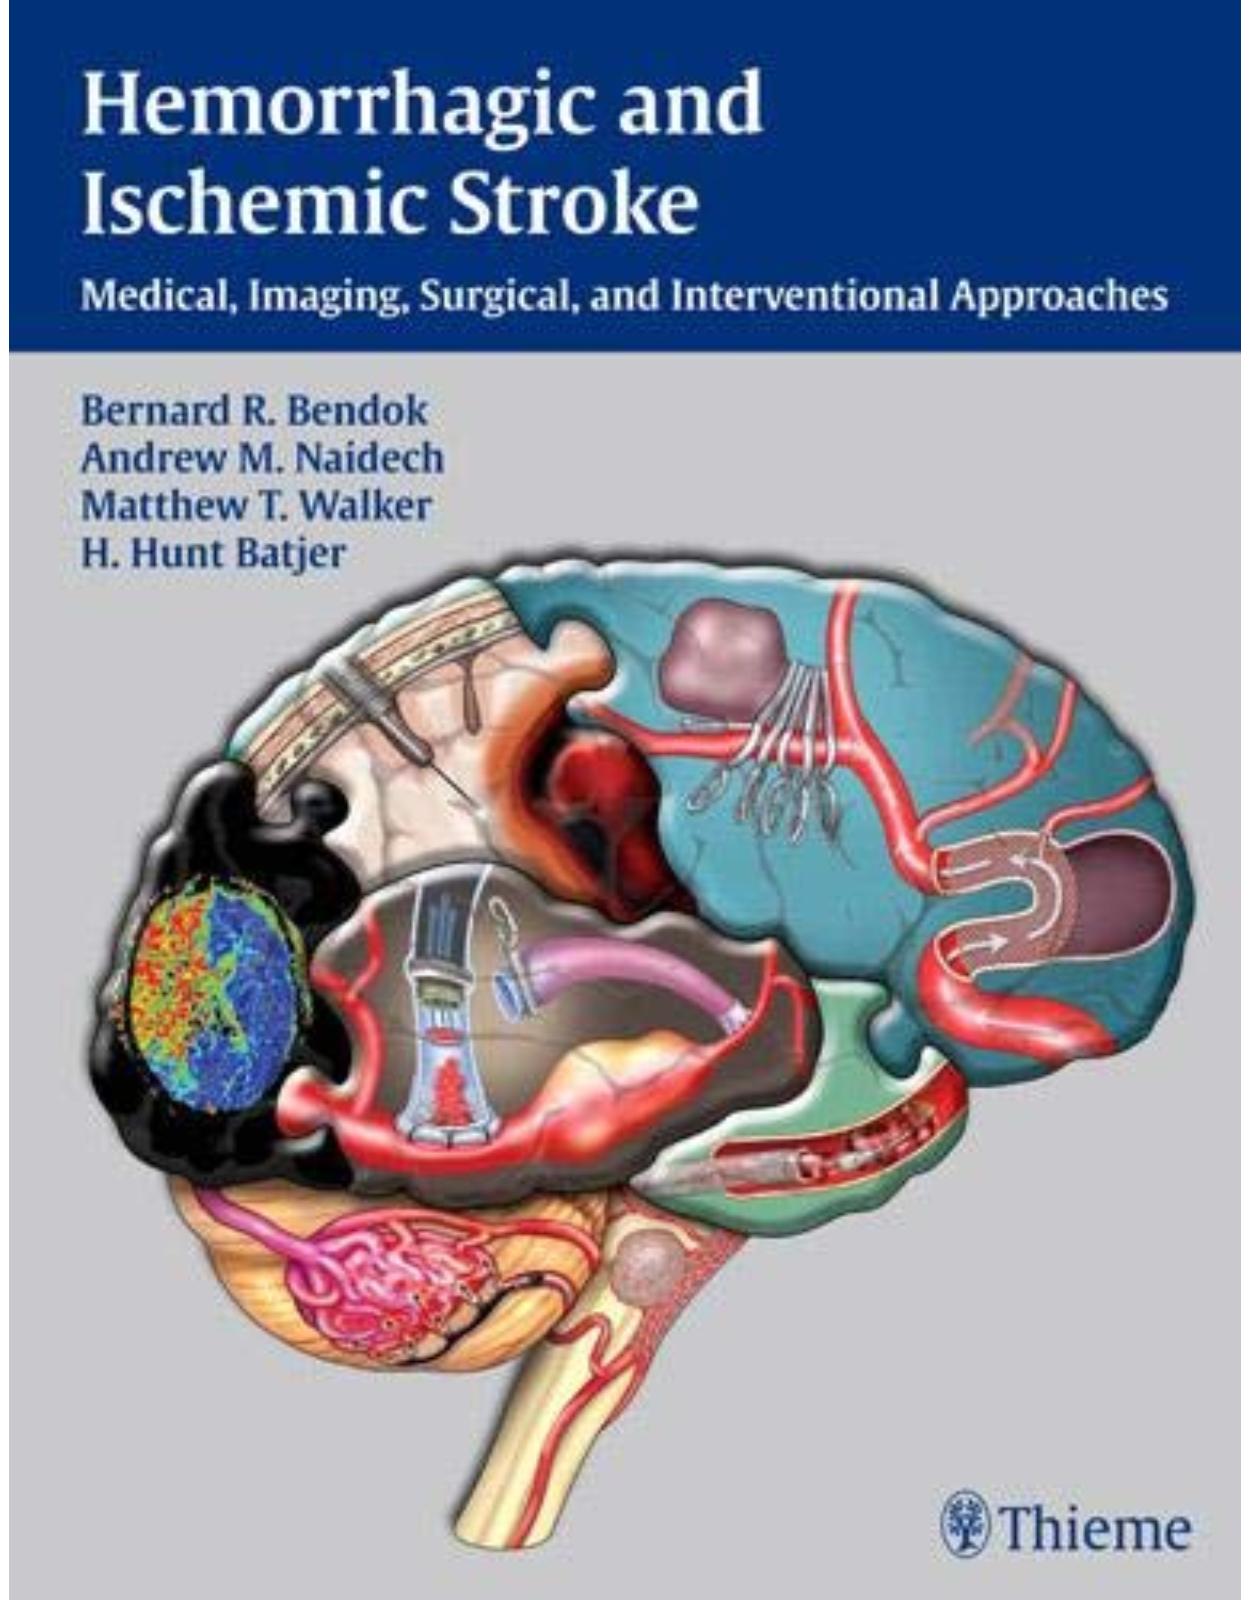 Hemorrhagic and Ischemic Stroke: Medical, Imaging, Surgical and Interventional Approaches 